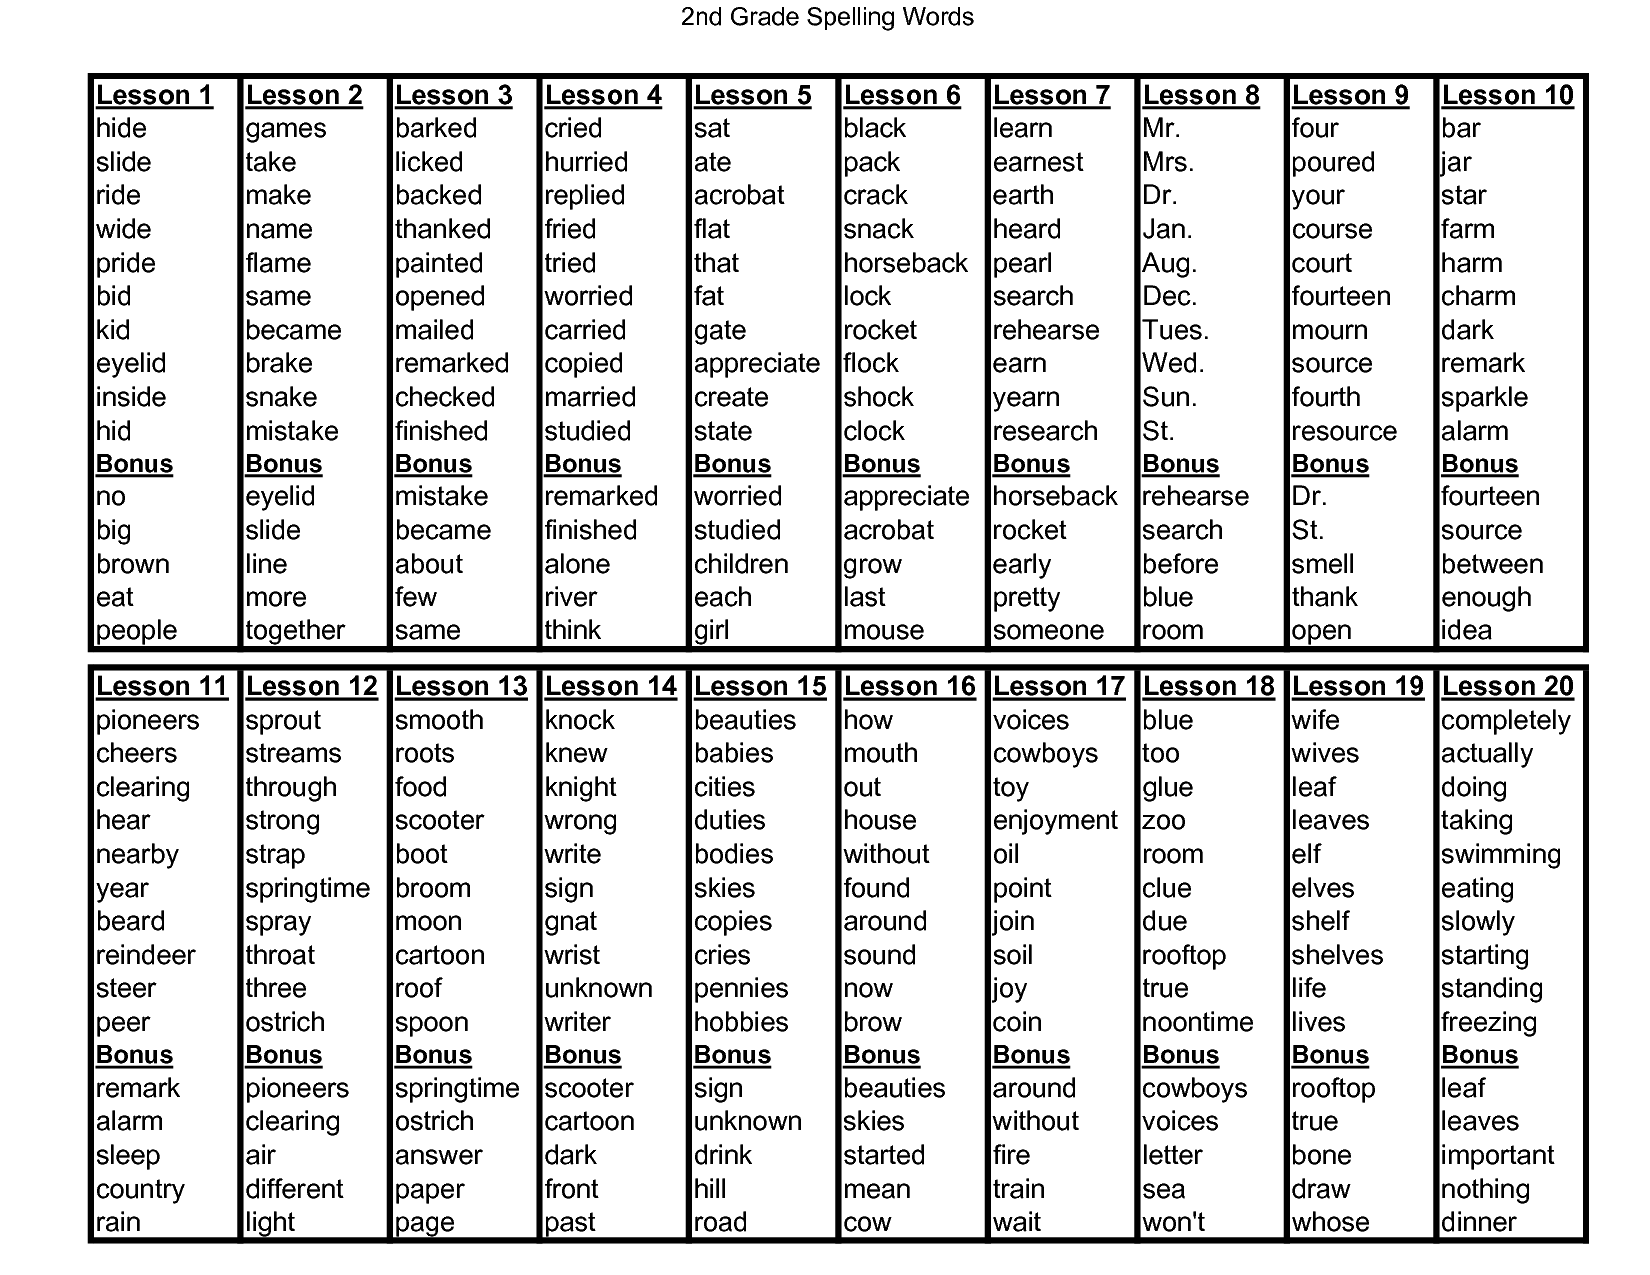 4th Grade Spelling Word List for the Year Image